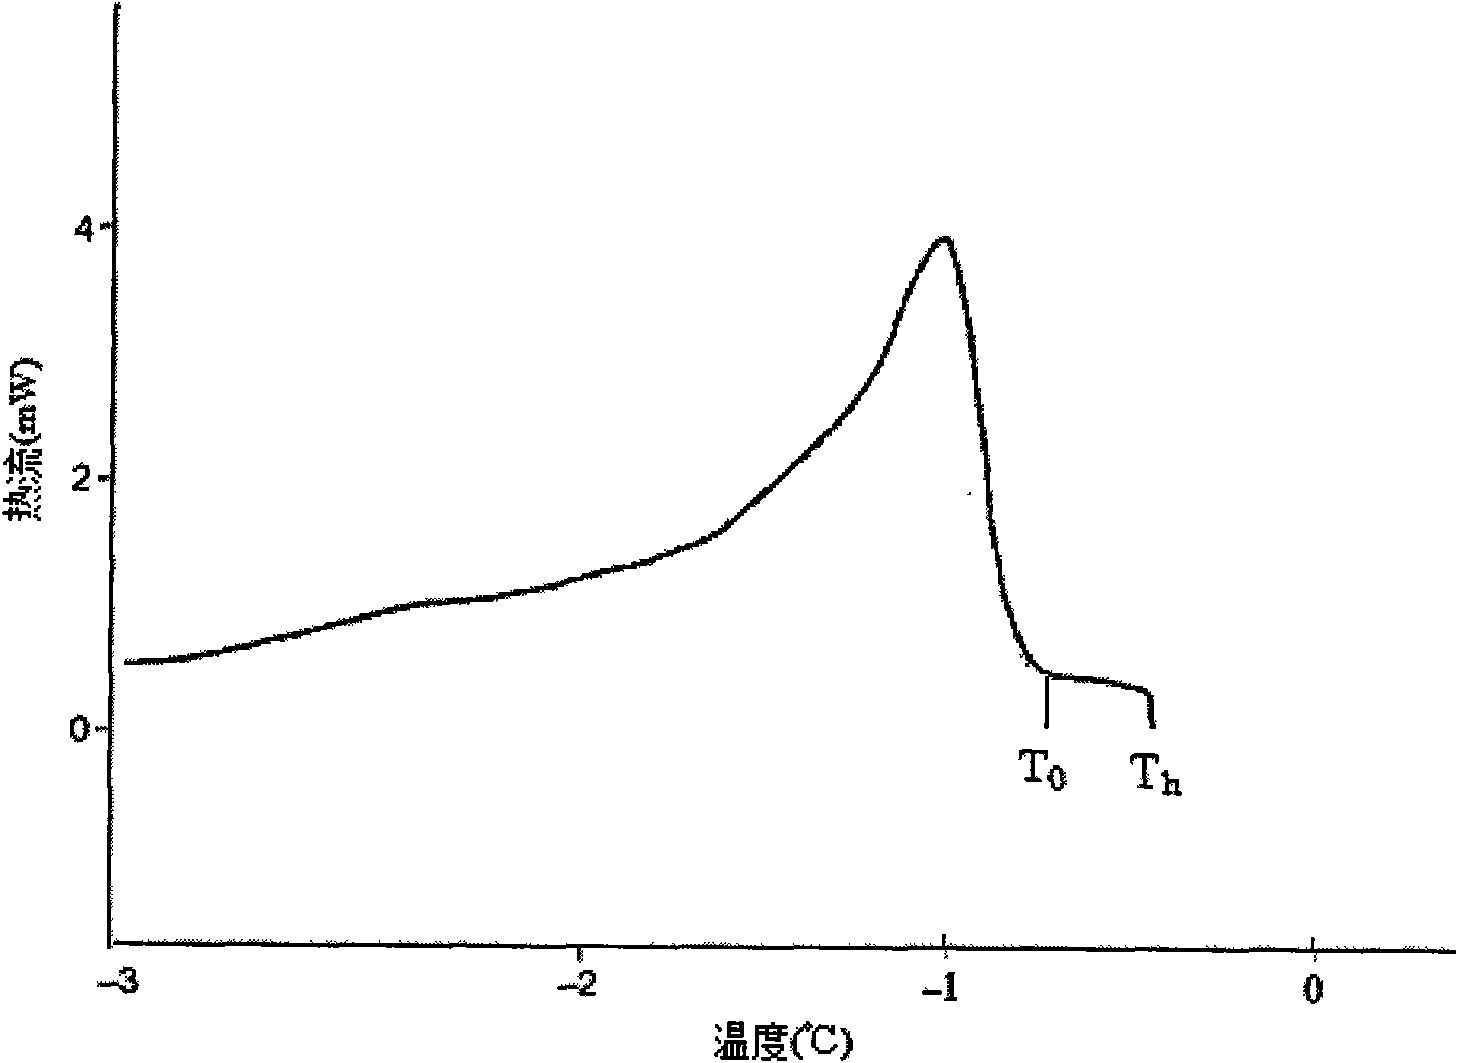 Method for separating and purifying plant ice structural protein